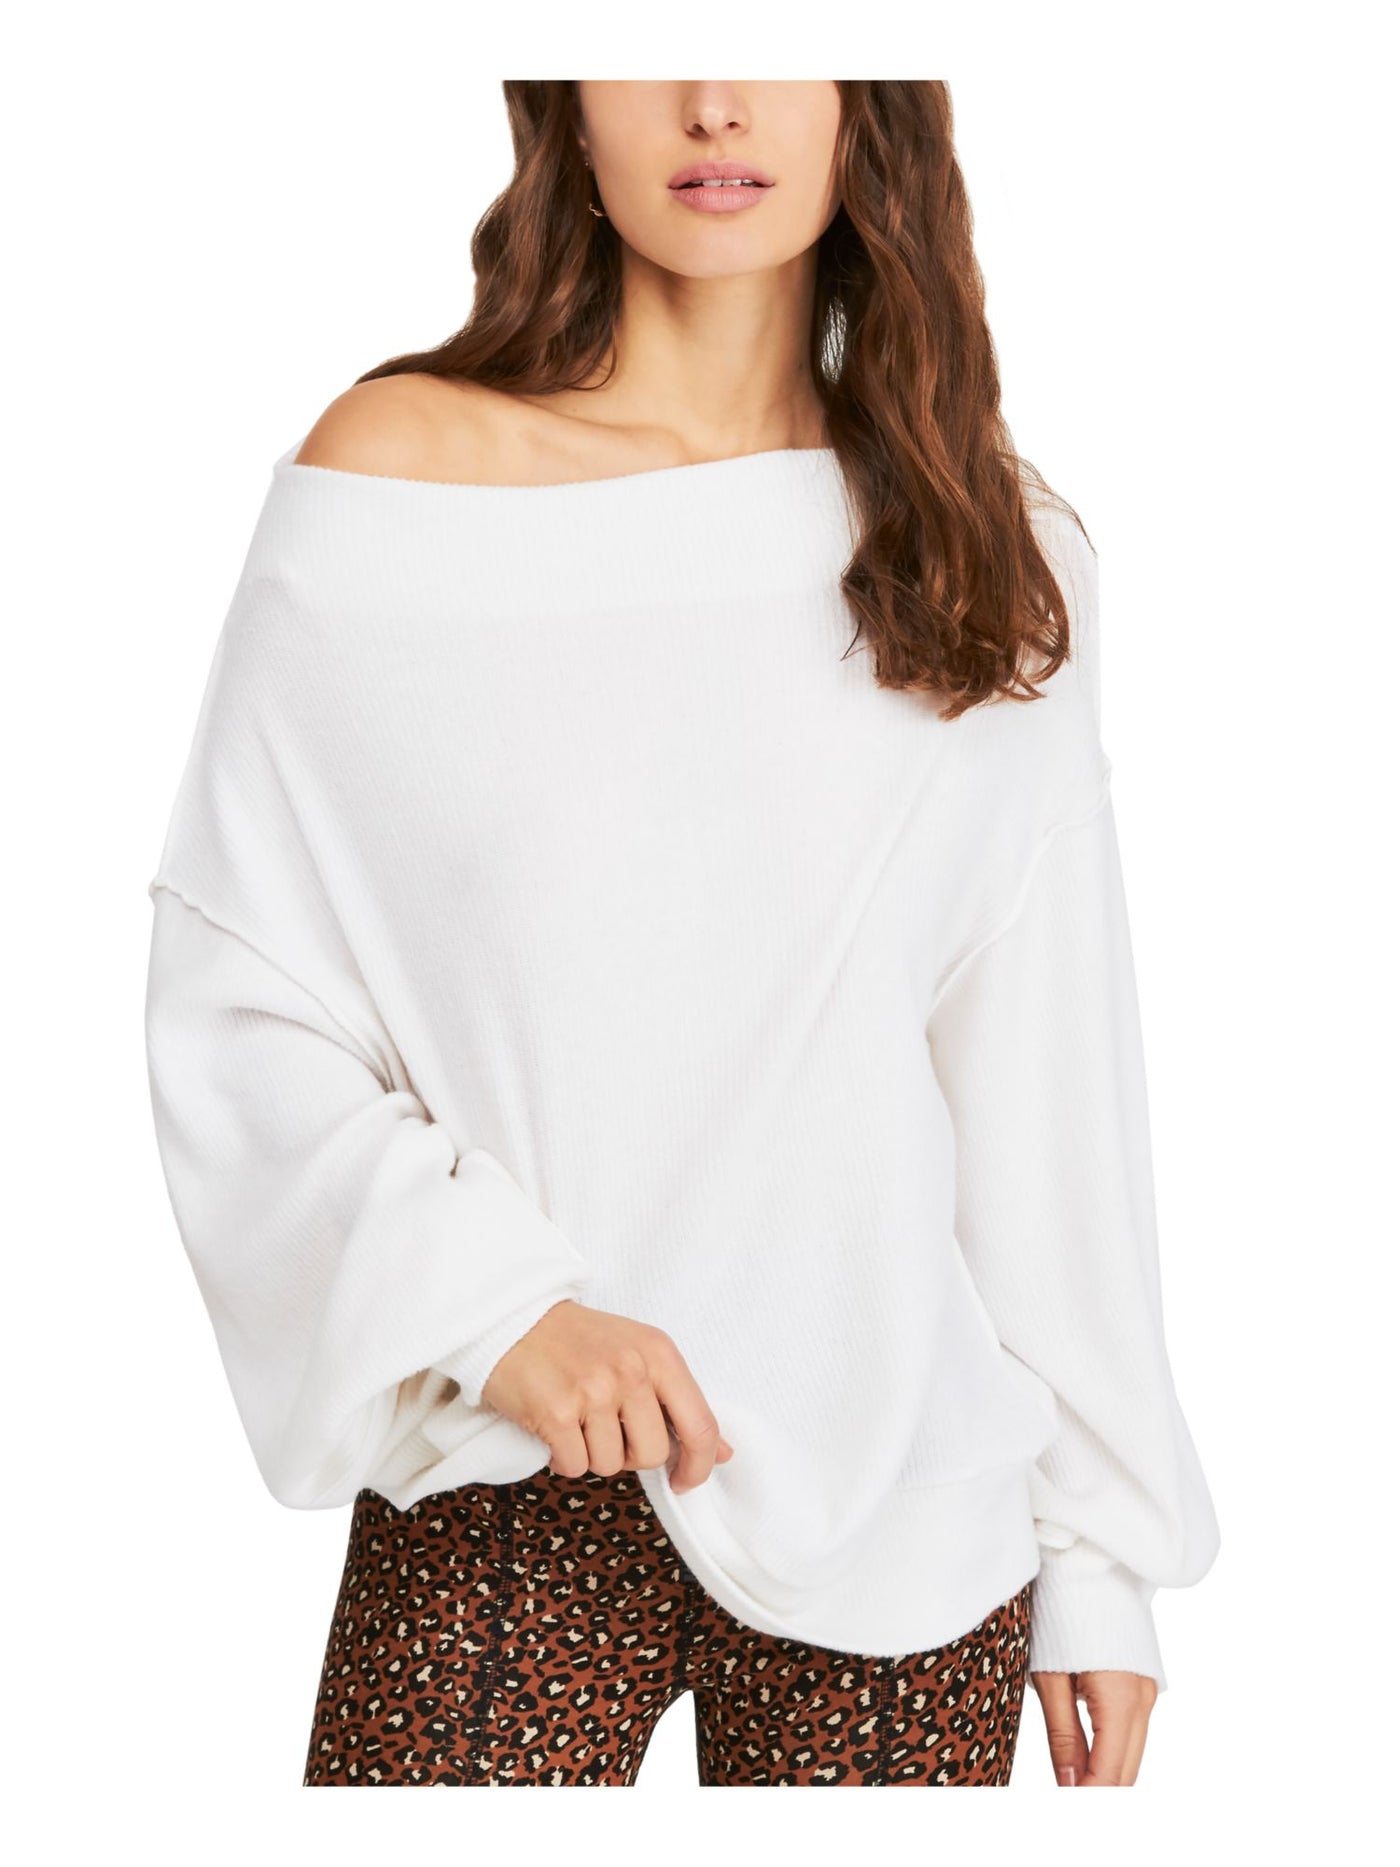 FREE PEOPLE Womens White Long Sleeve Cowl Neck Tunic Sweater S